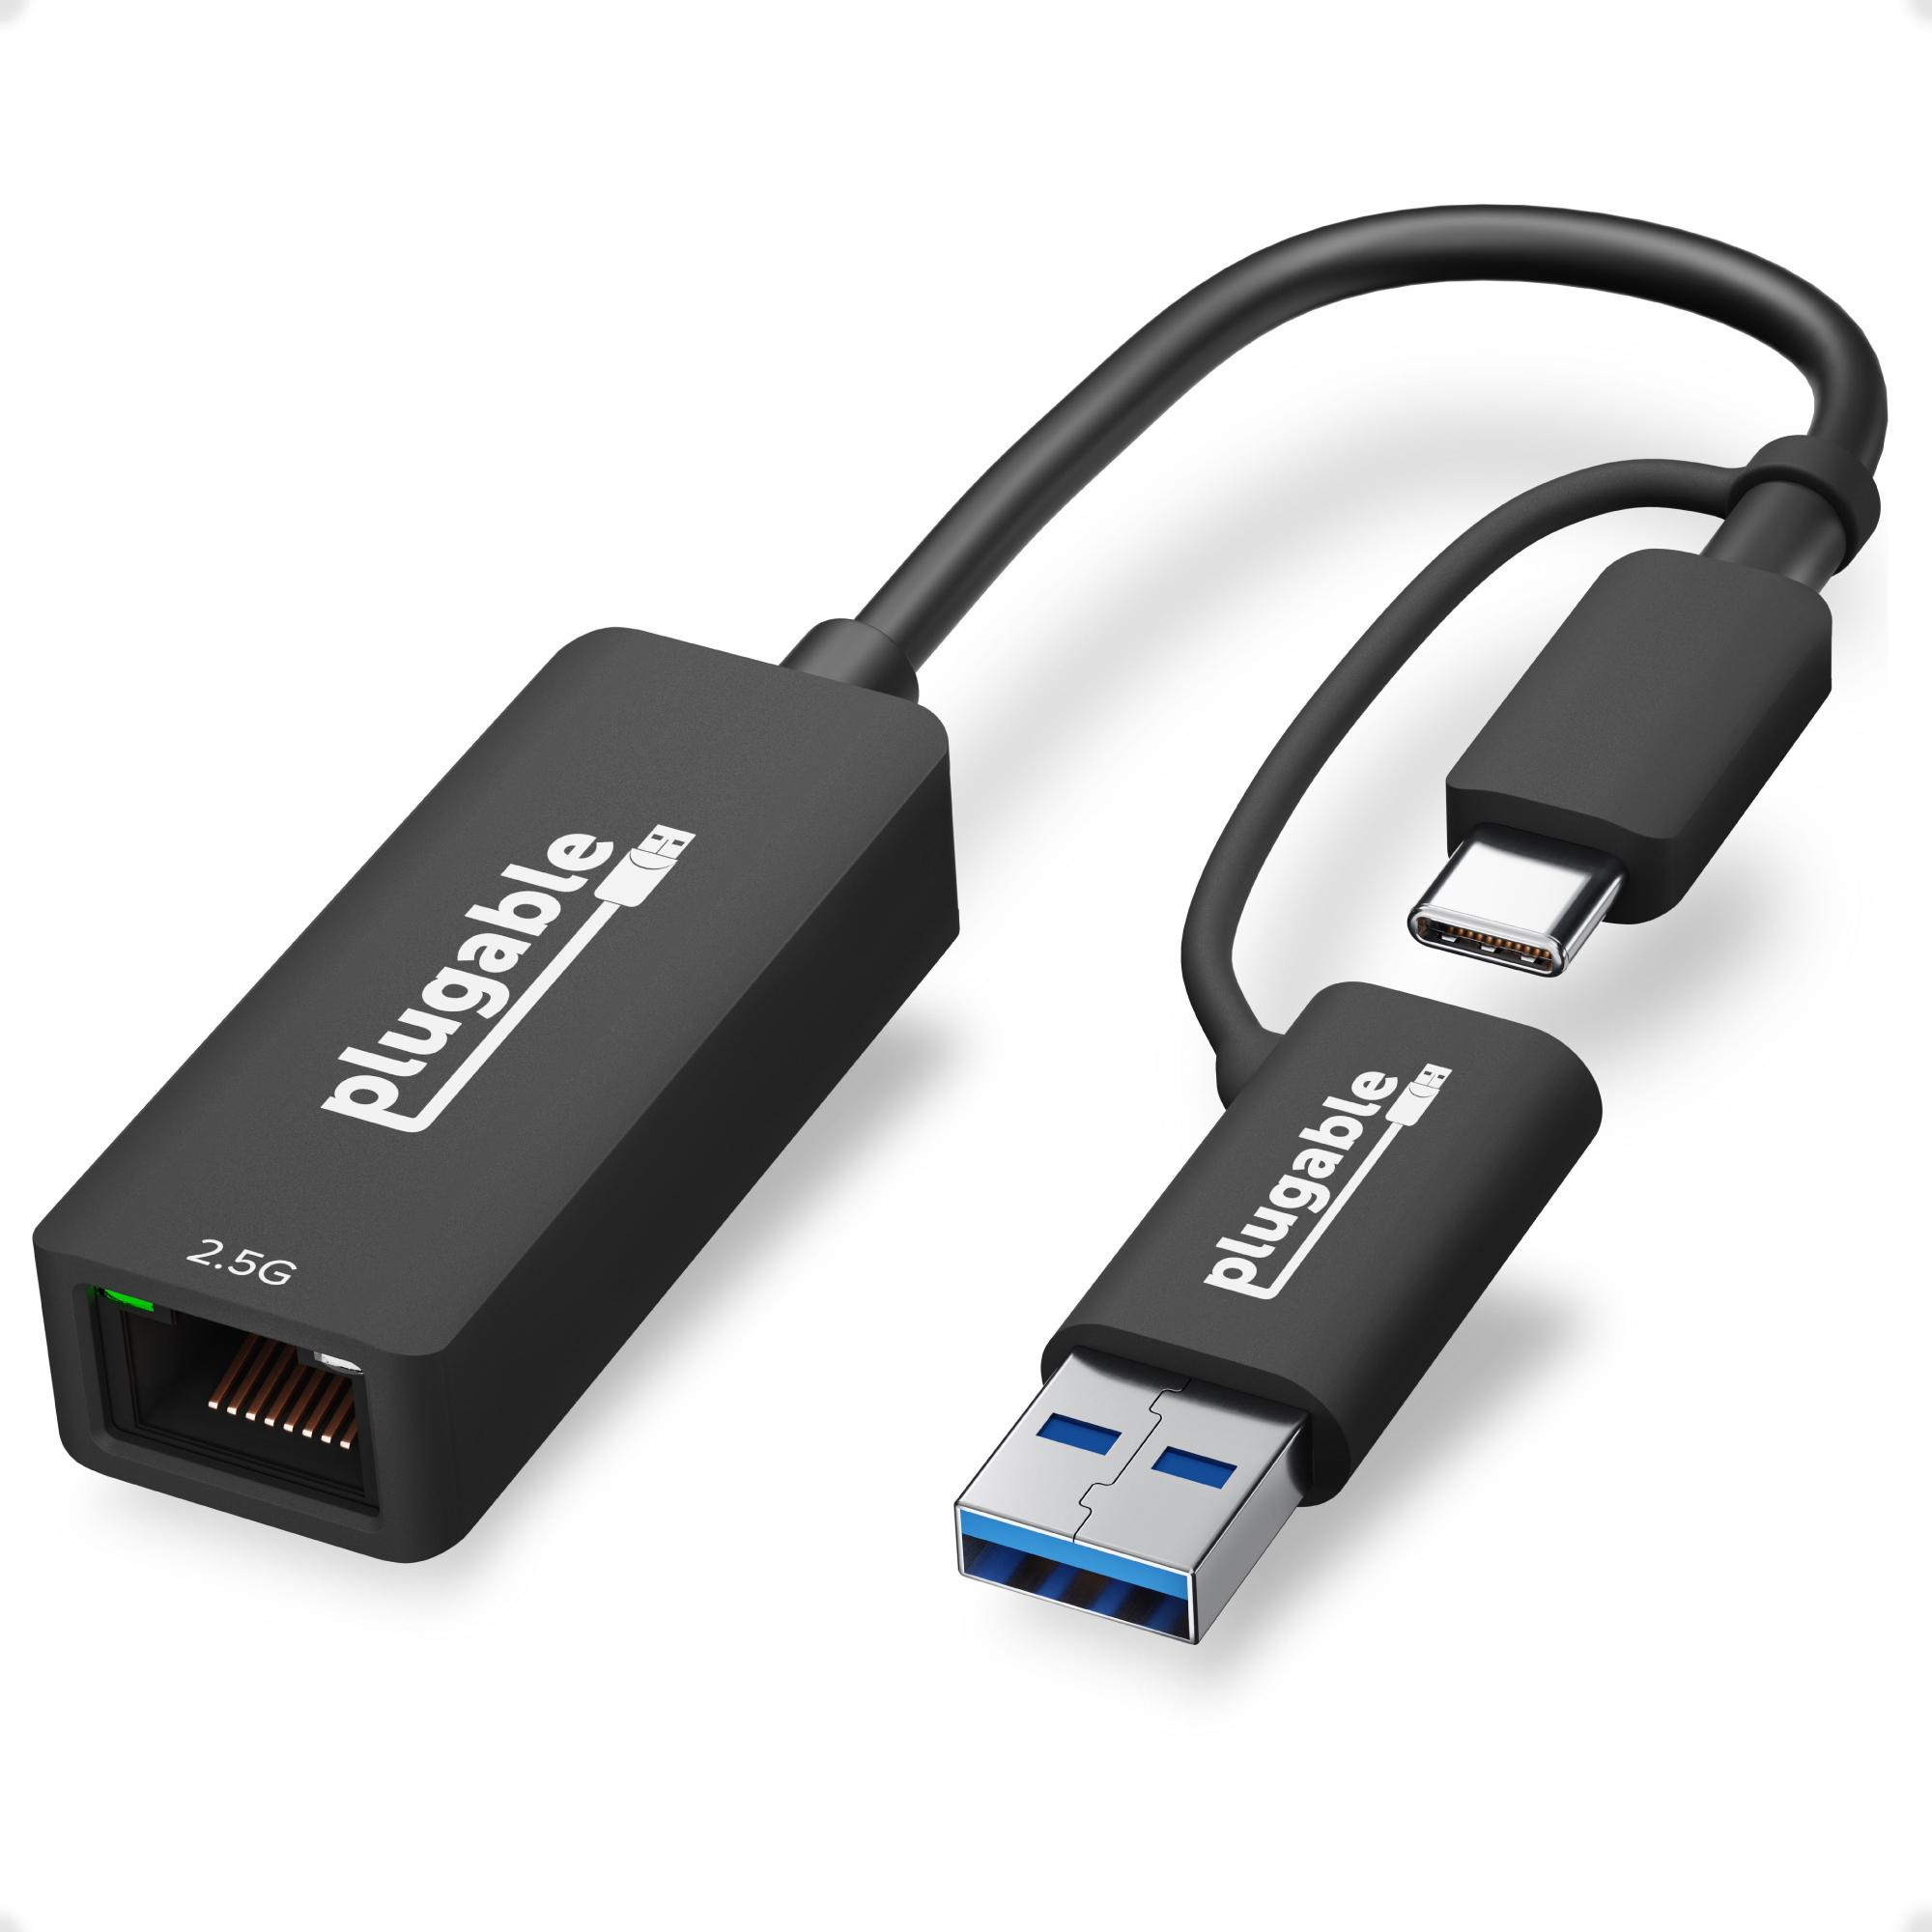 USBC-E2500 PLUGABLE TECHNOLOGIES 2.5G USB C &USB TO ETHERNET ADAPTER, 2-IN-1 ADAPTER COMPATIBLE WITH USB C/THUNDE